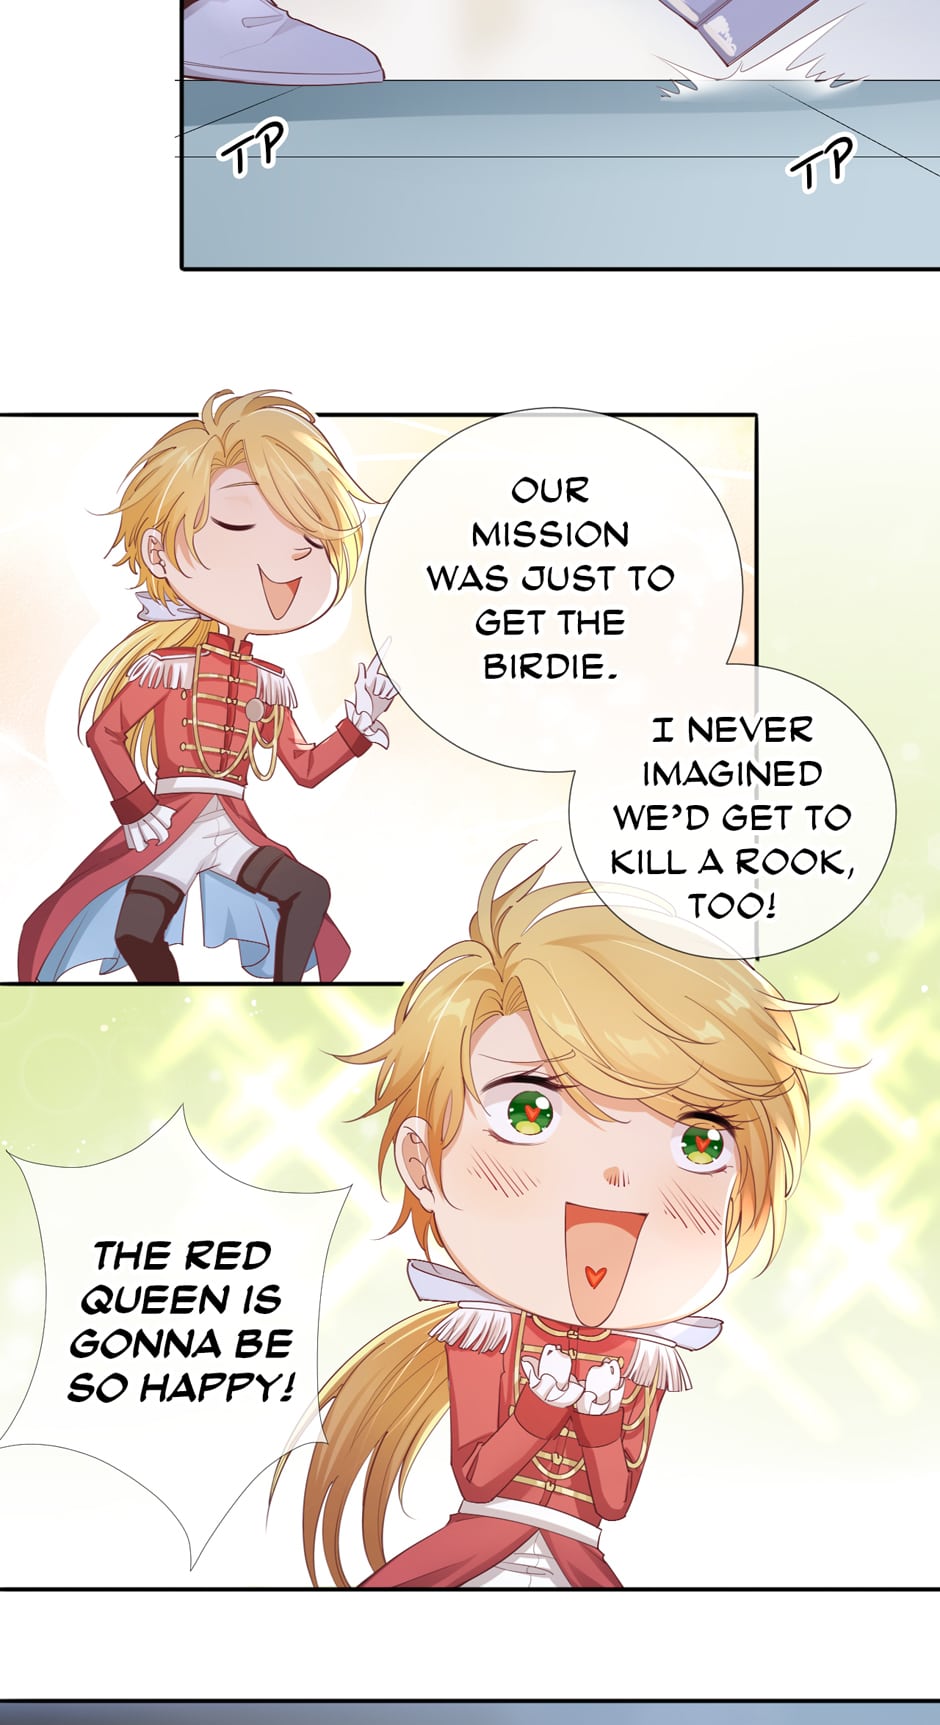 The Queen's Knights Ch.14